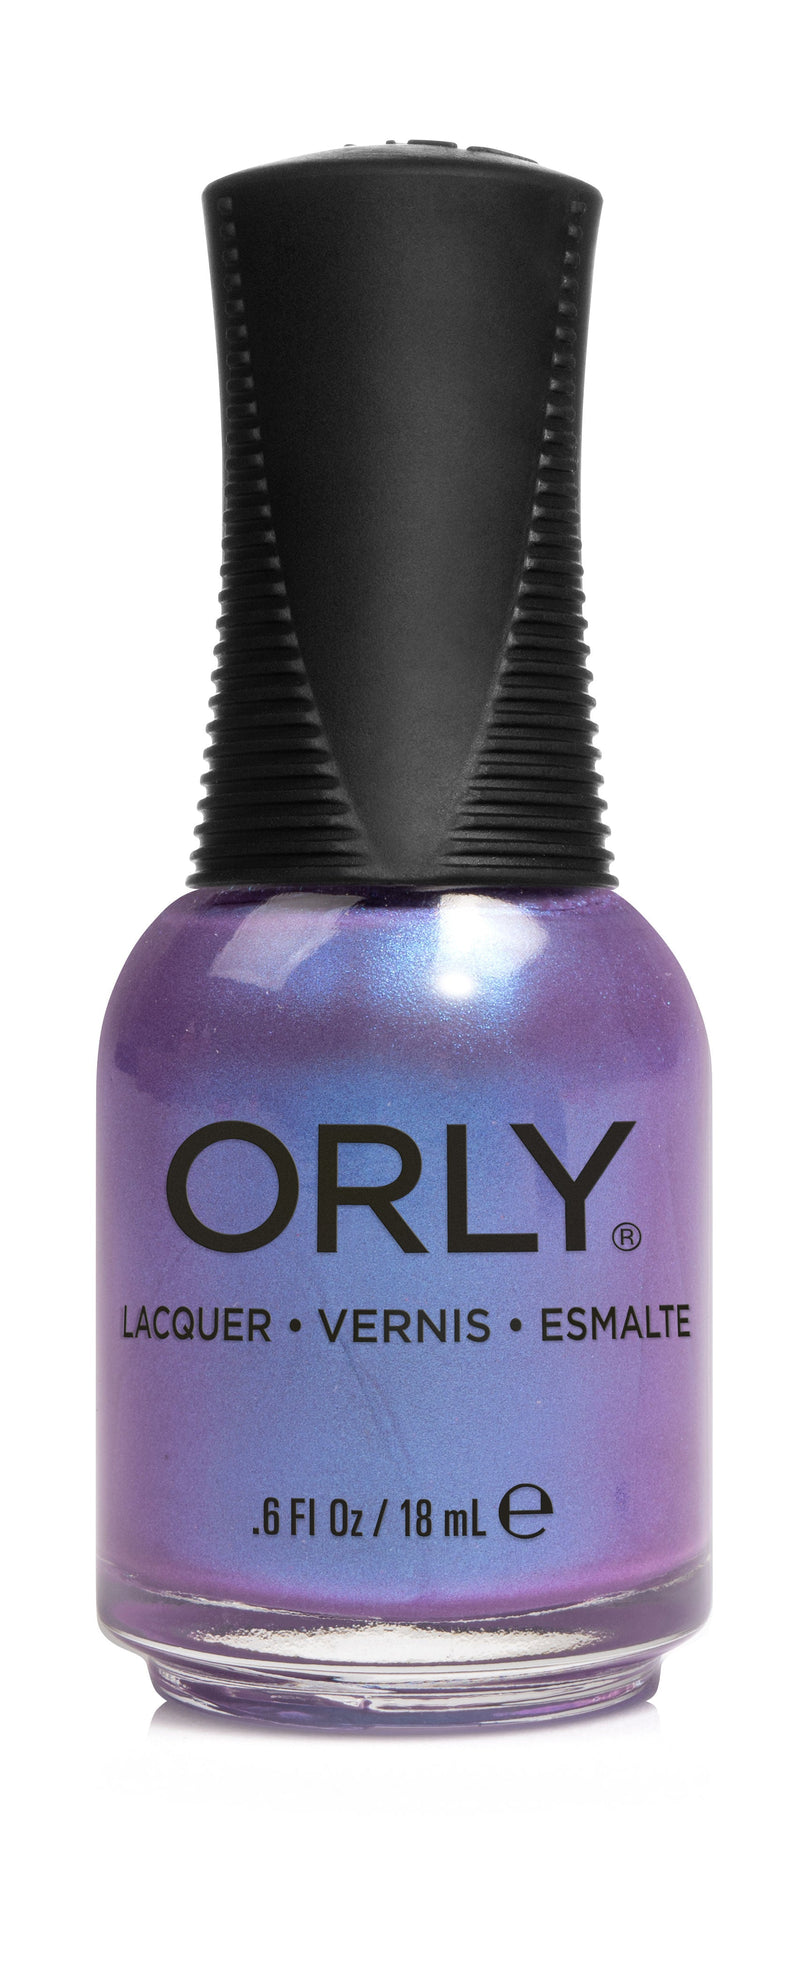 Orly - Opposites Attract Nail Polish